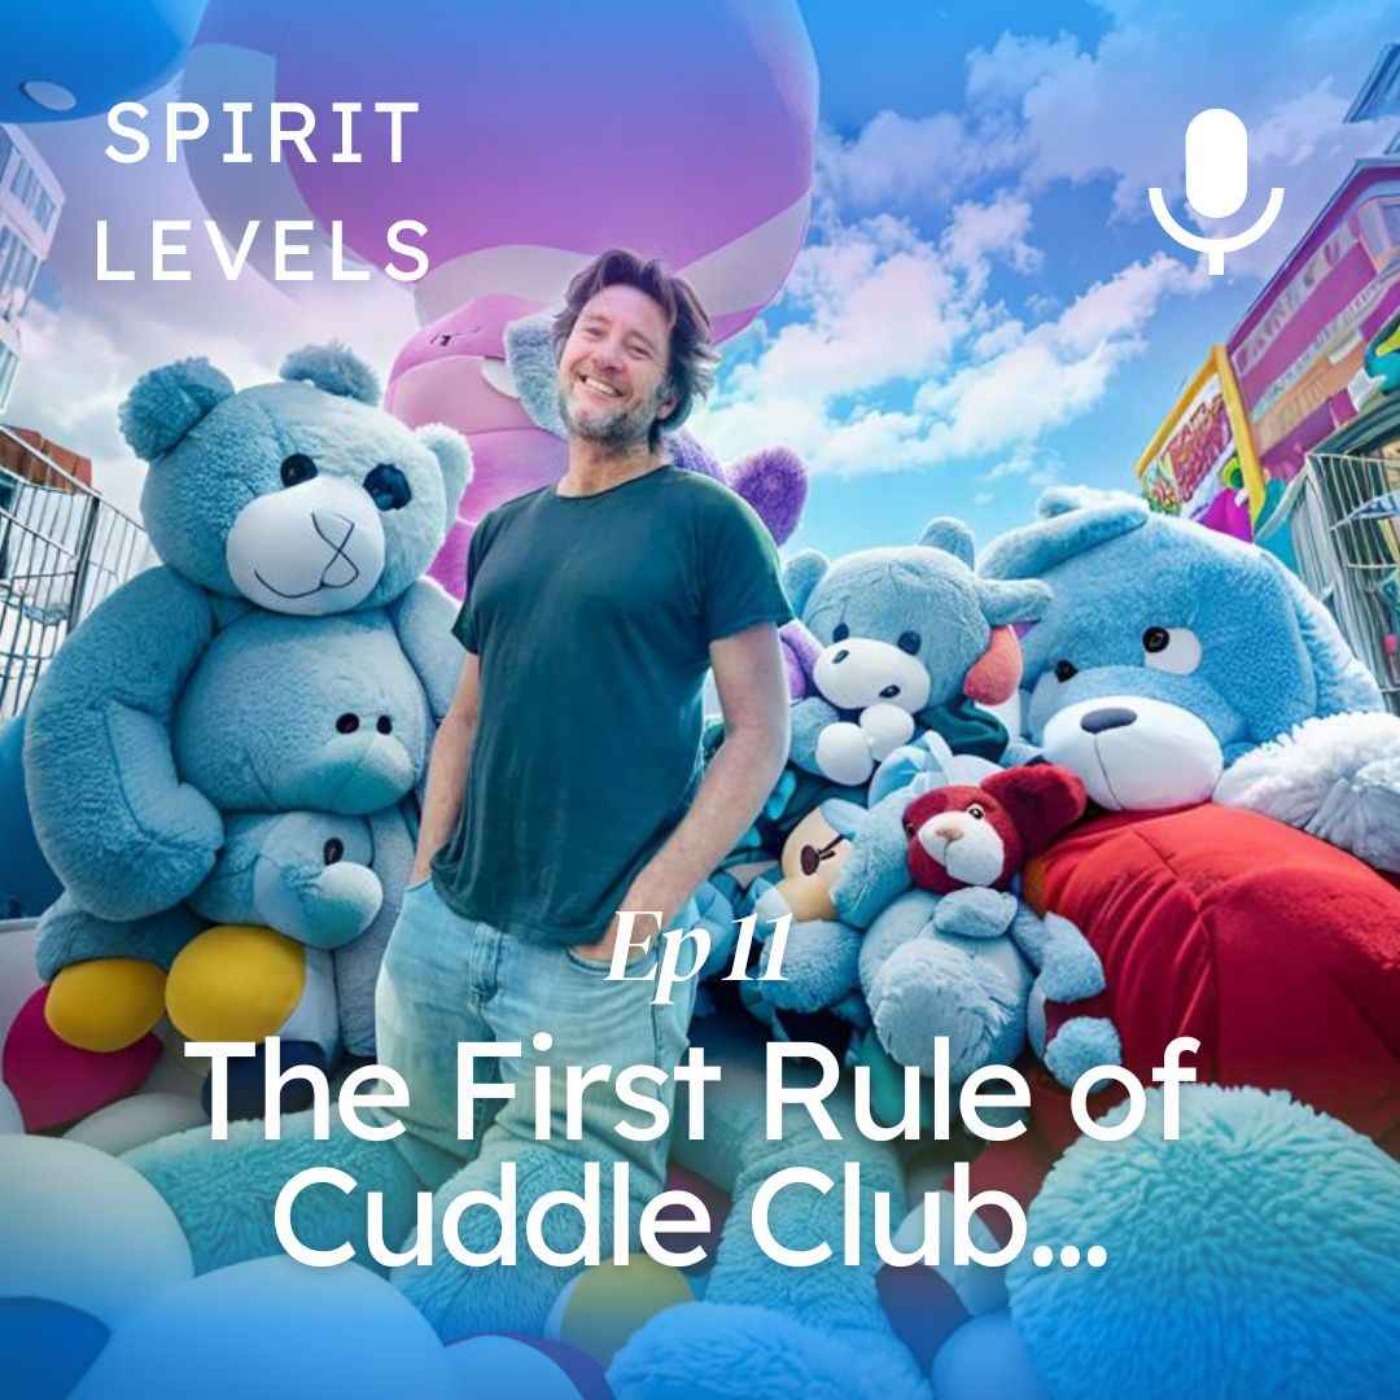 The First Rule of Cuddle Club...